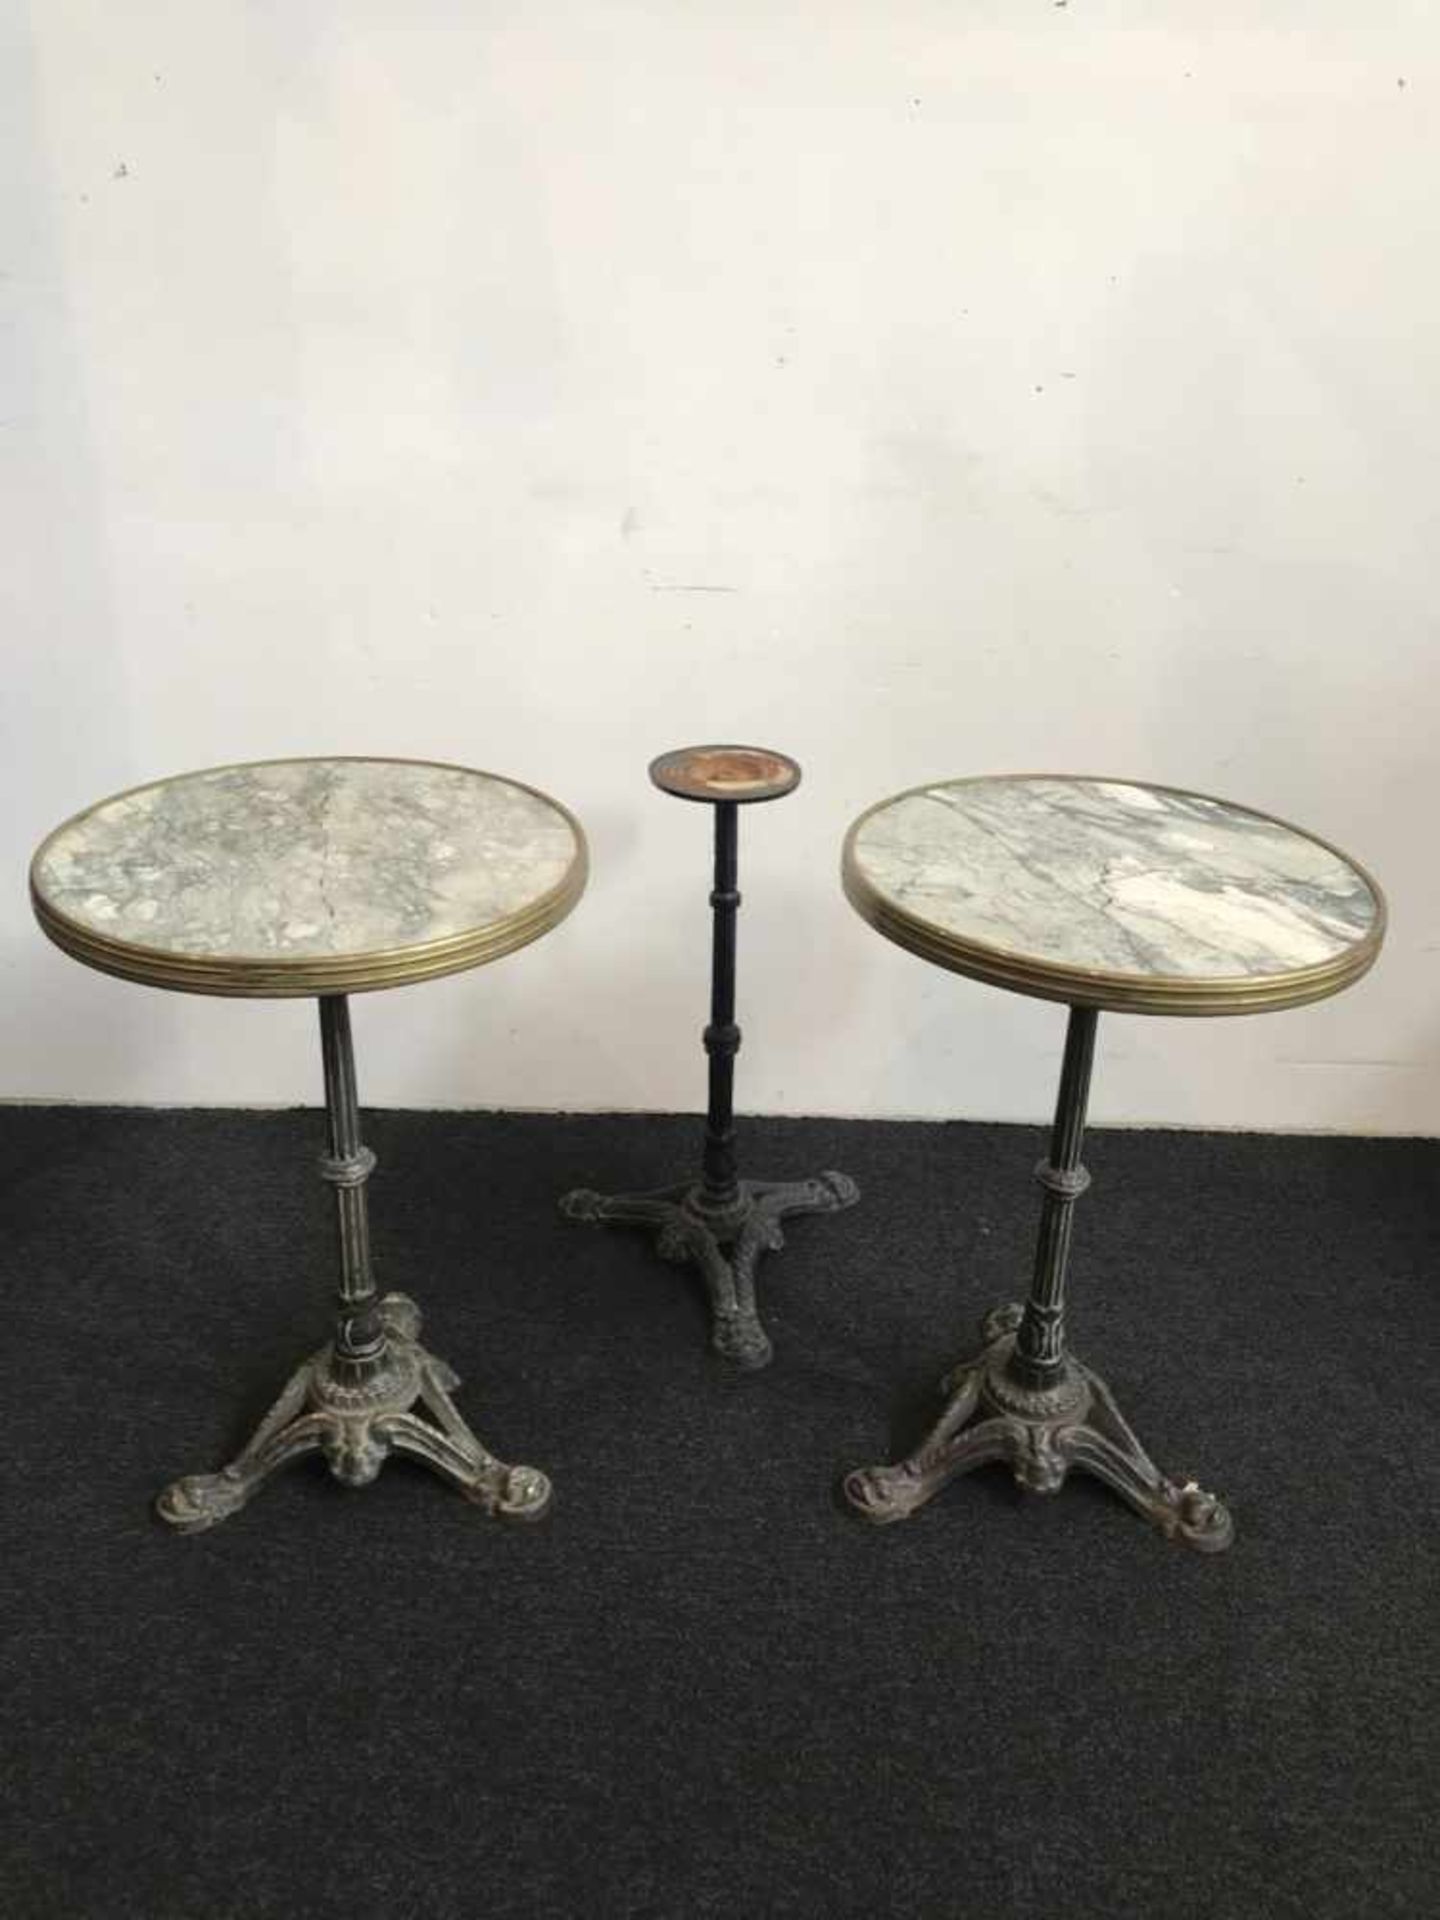 Pair of old bistro tables from Café theater + base dia 50 H 73 cm marble cracked